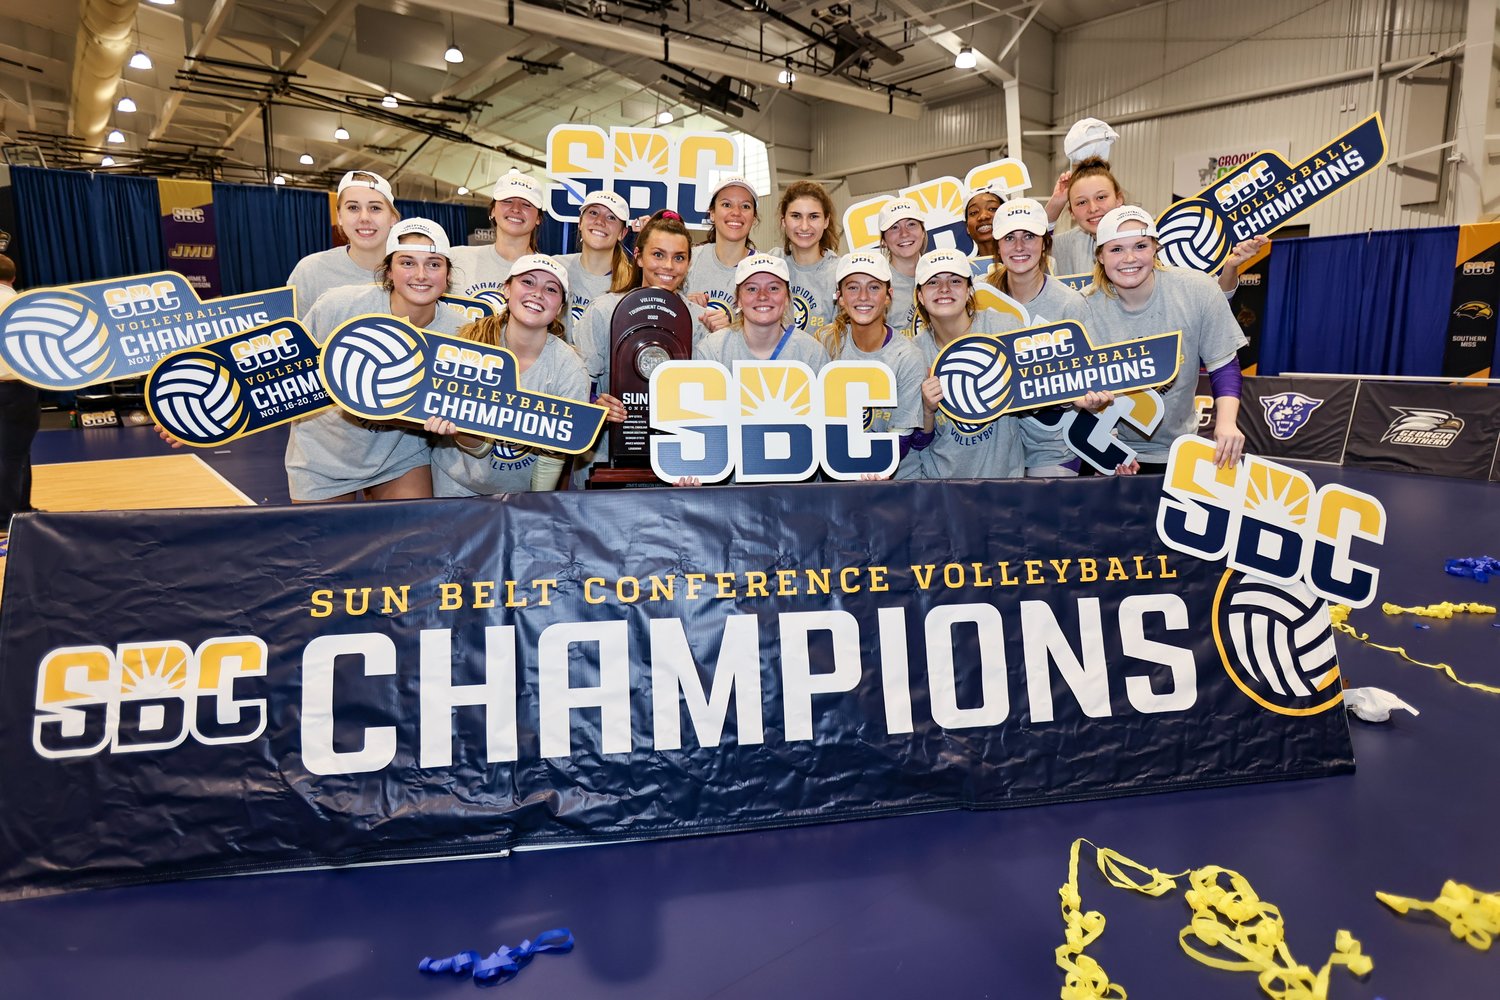 The James Madison Dukes won the Sun Belt Conference volleyball tournament championship Saturday at the Foley Event Center in their first season in the conference. Caroline Dozier was named to the all-tournament team where Sophie Davis was named the tournament’s most outstanding player.